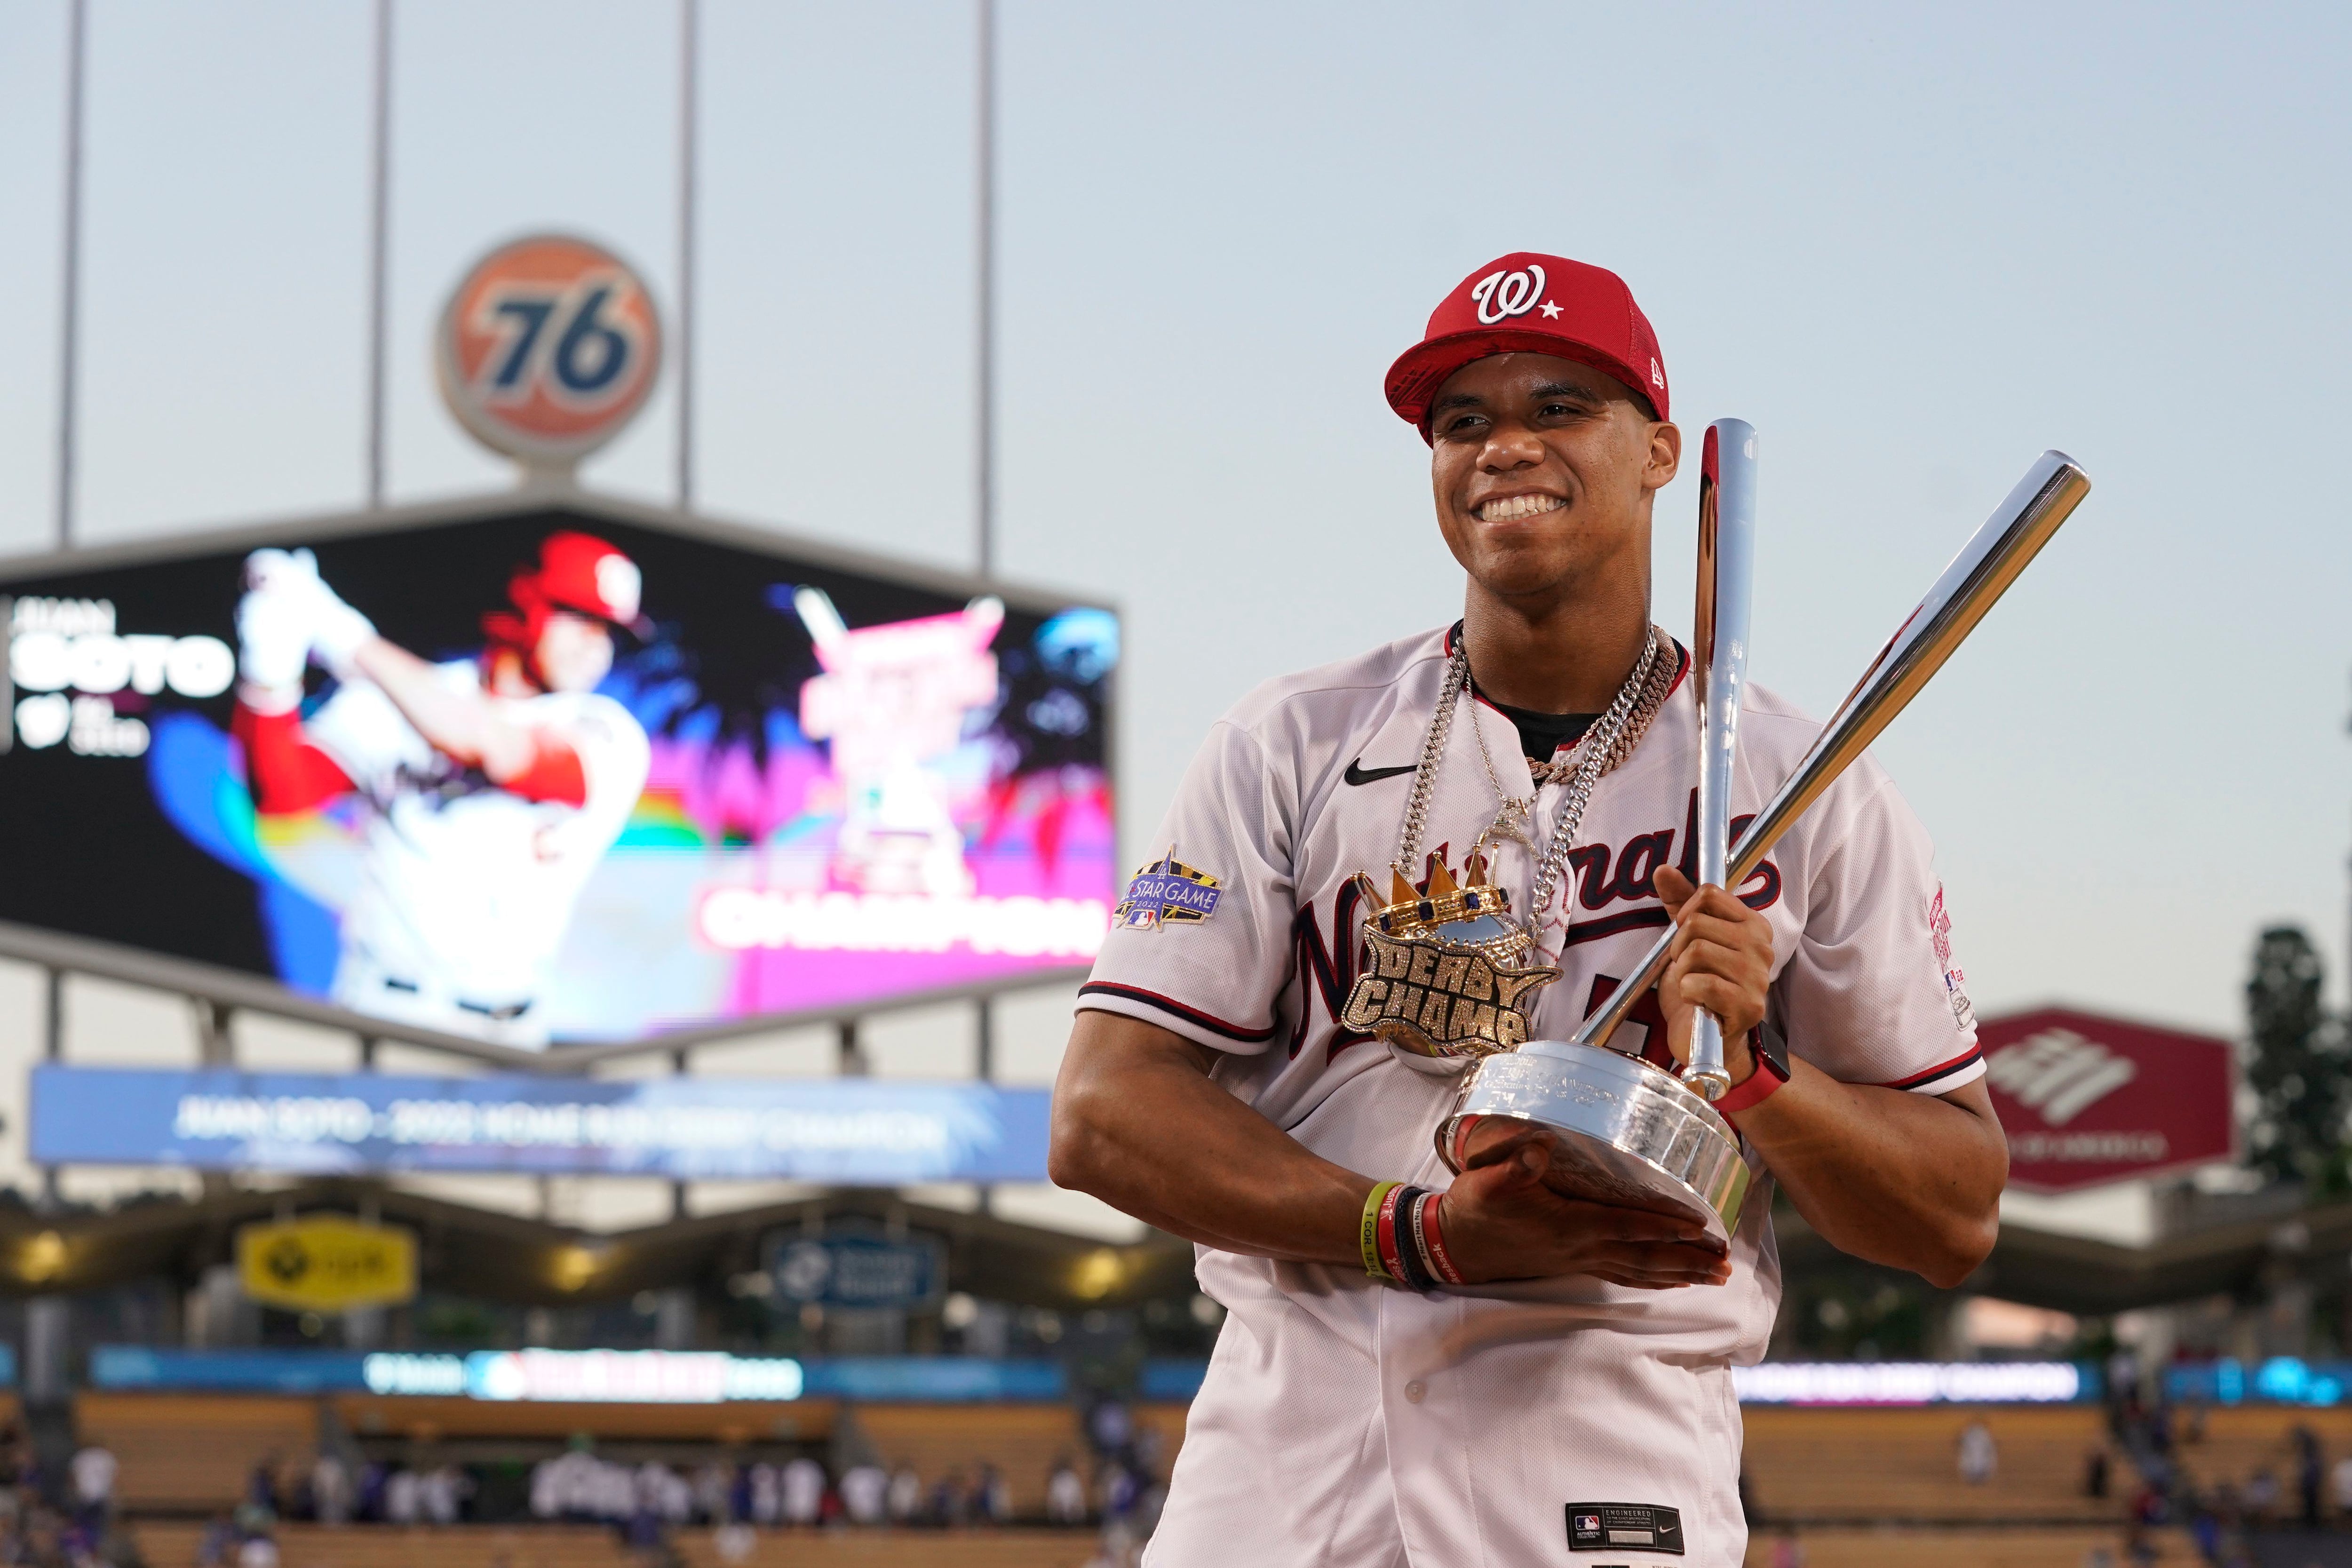 Home Run Derby: Start time, participants, bracket, how to watch and